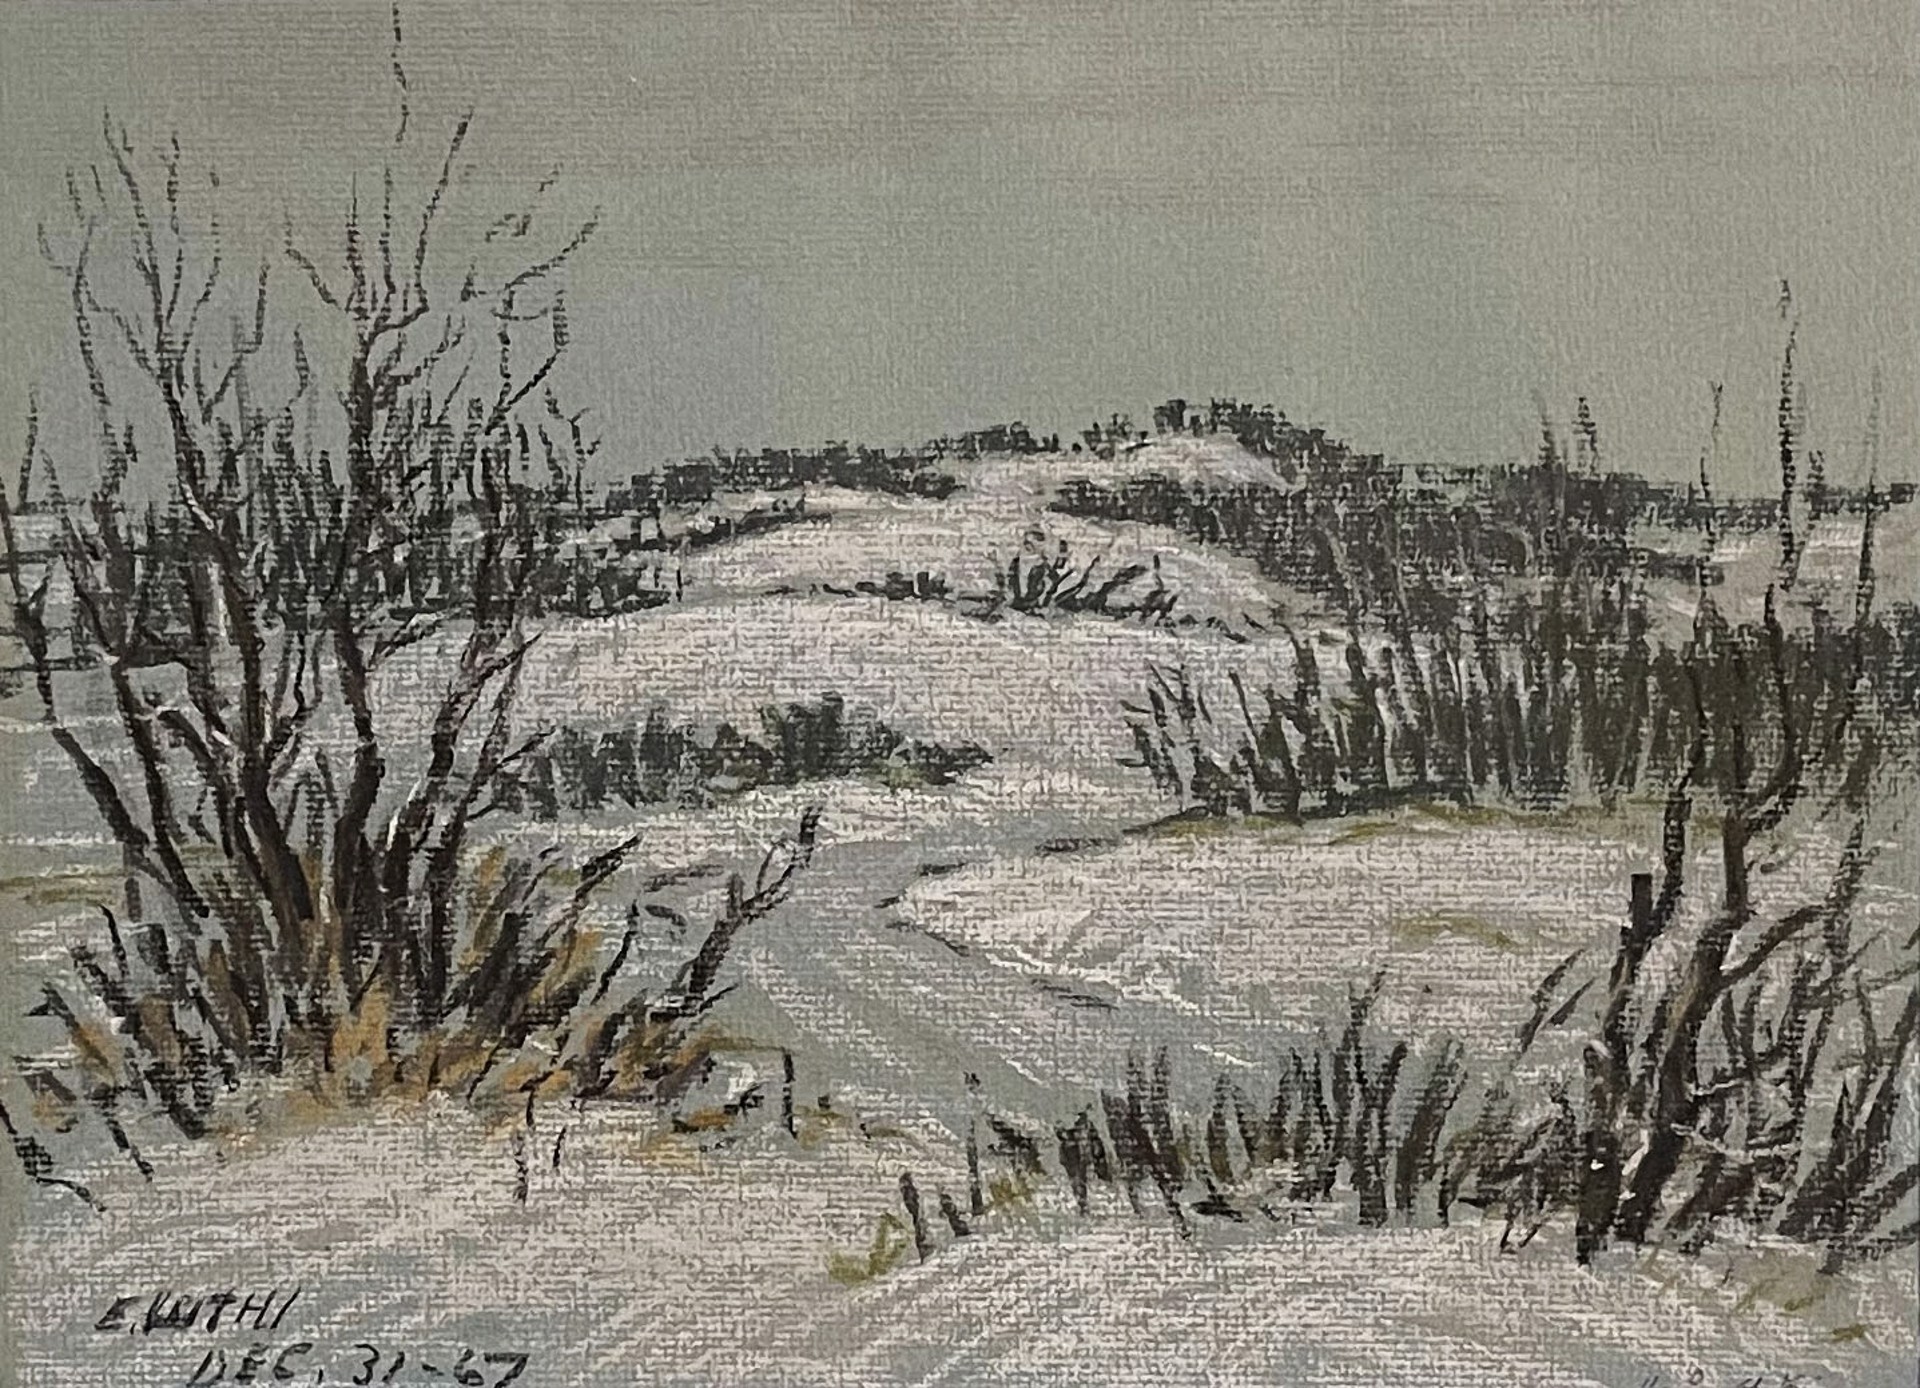 Winter in the Touchwood Hills at Punnichy by Ernest Luthi (1906-1983)